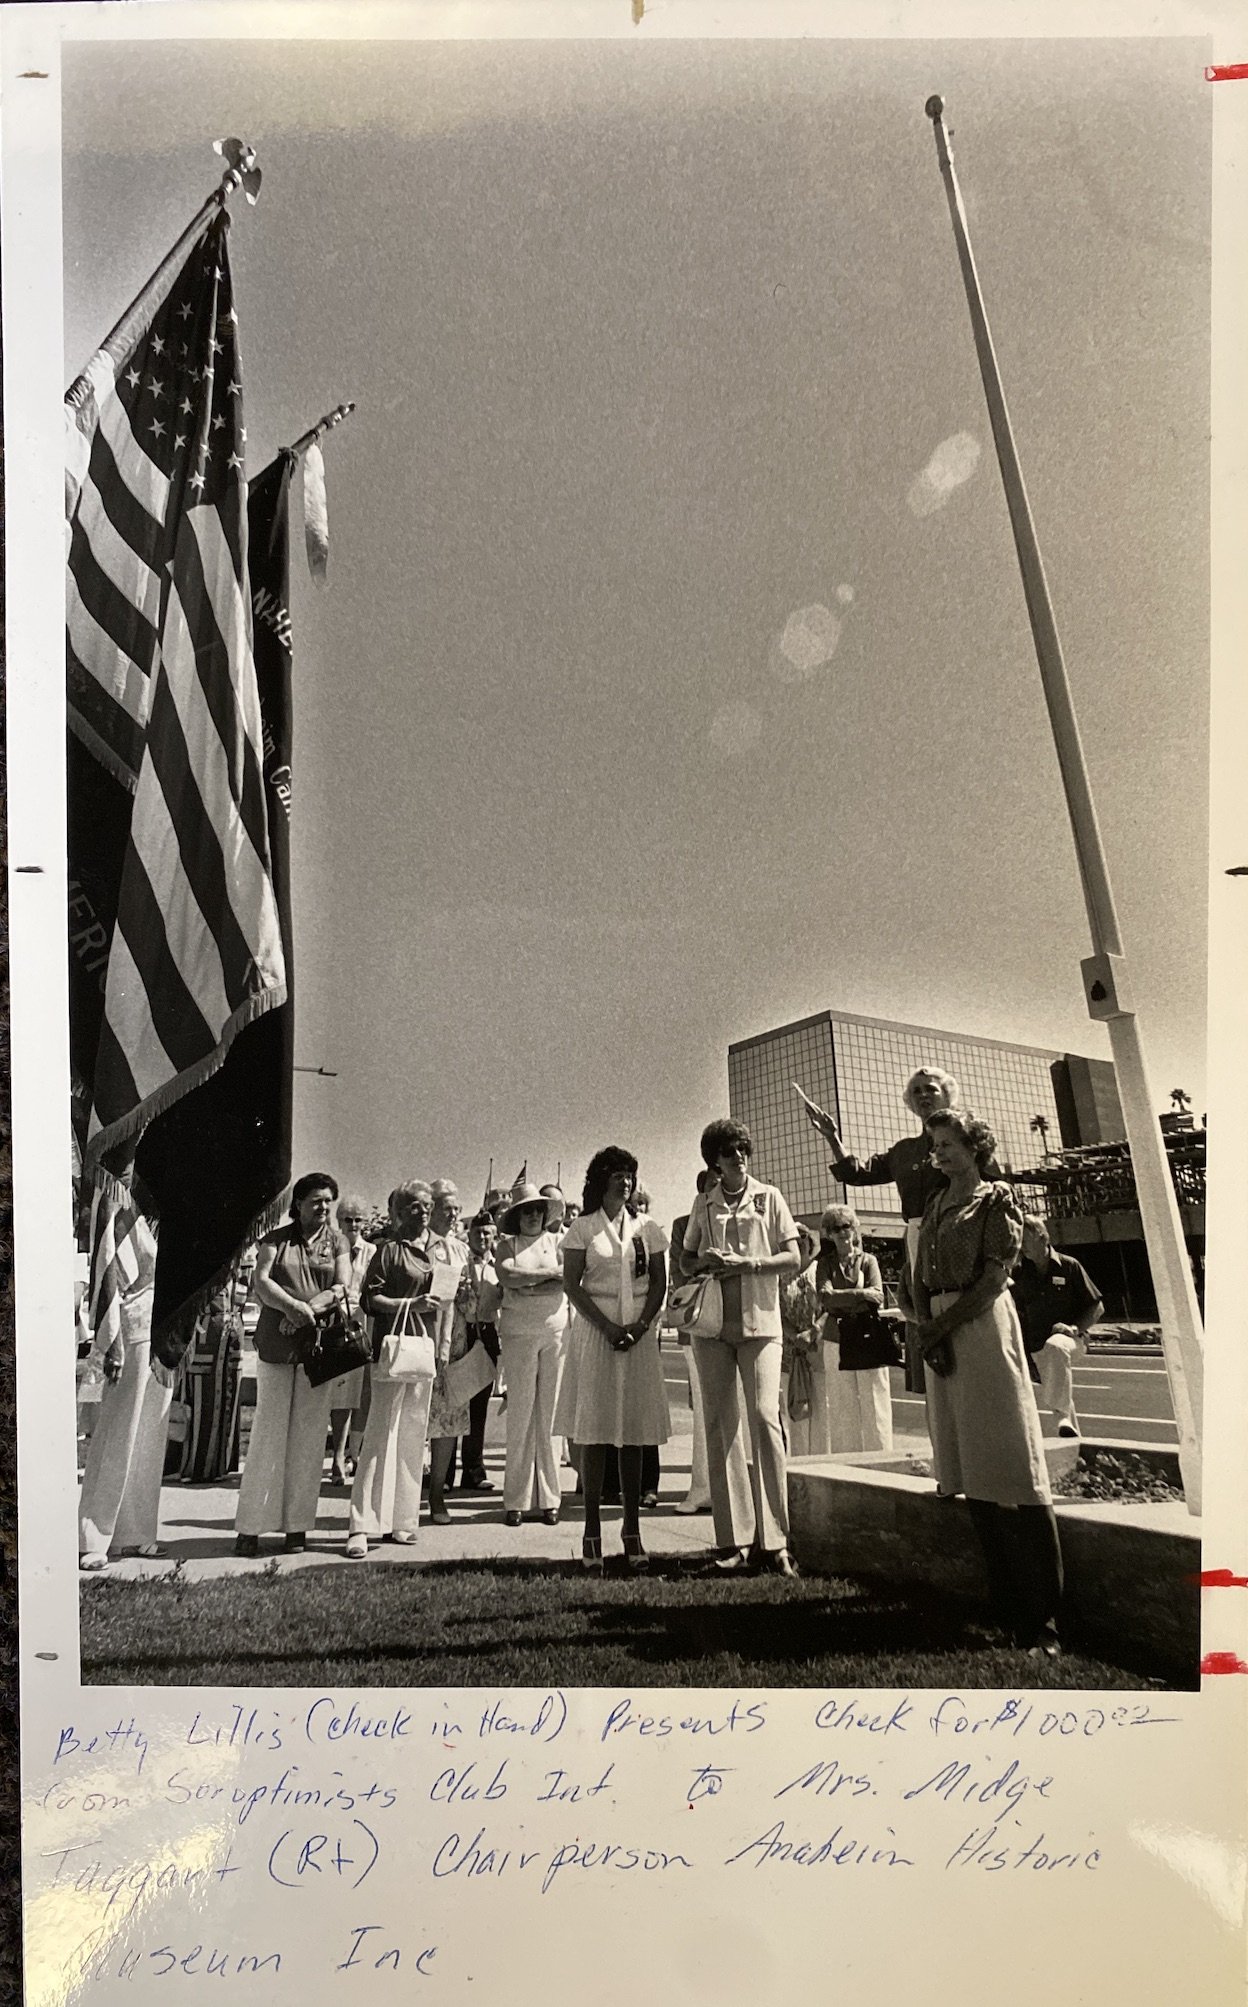  Midge Taggart (standing on grass far right) accepting donation from the Soroptimist Club for the Anaheim Museum, c. 1984. Courtesy of Anaheim Heritage Center.  